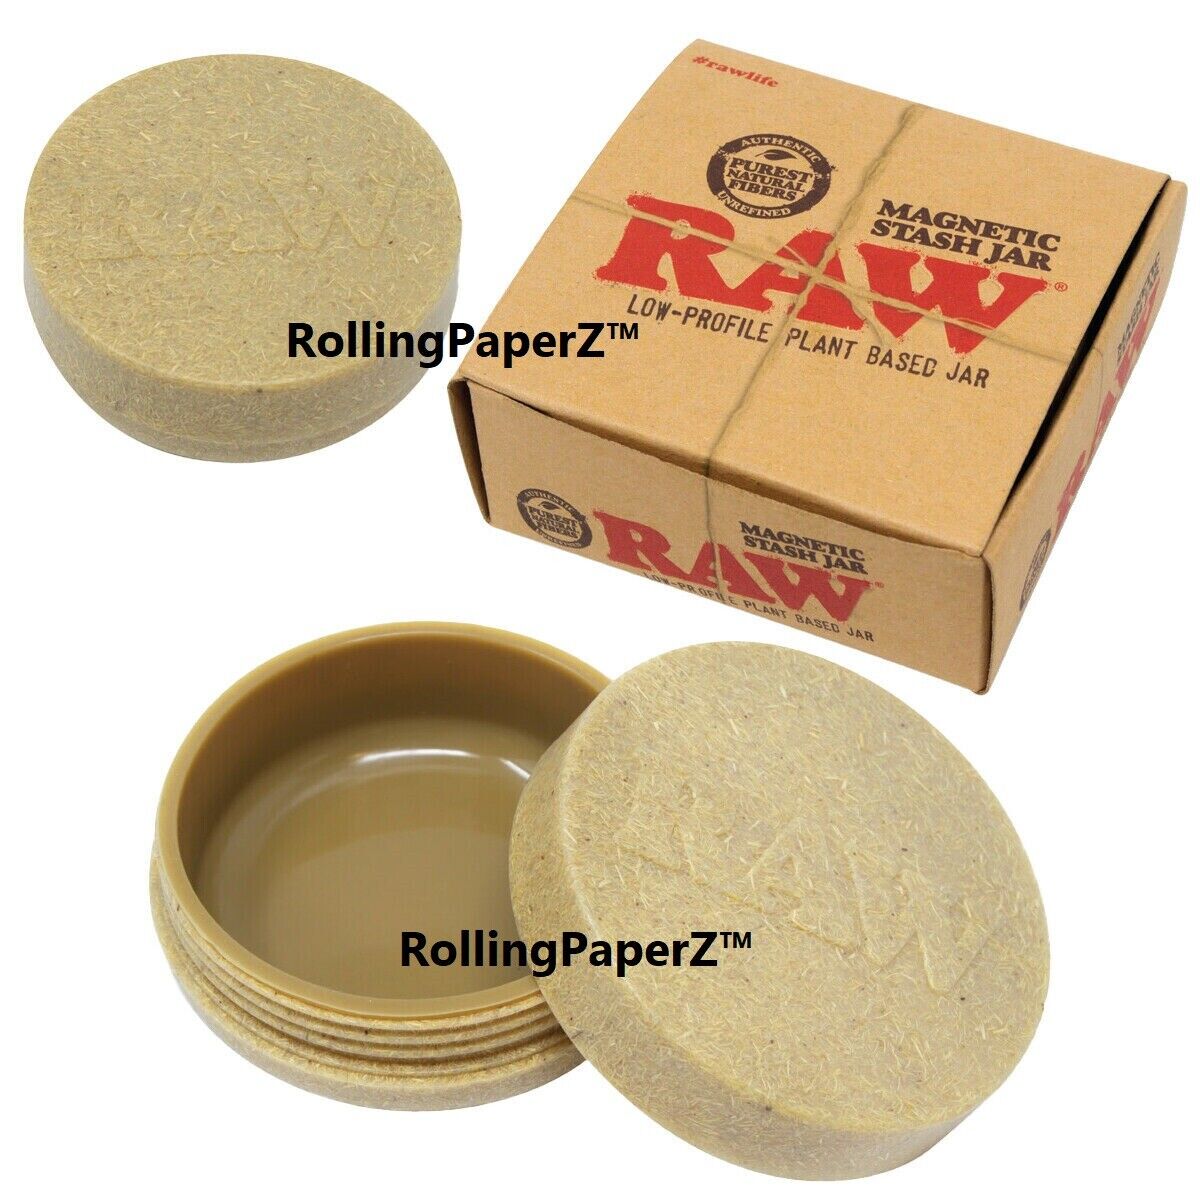 BUY TWO X RAW Magnetic Storage Pocket Jars With Silicone Insert Screw Top Lid